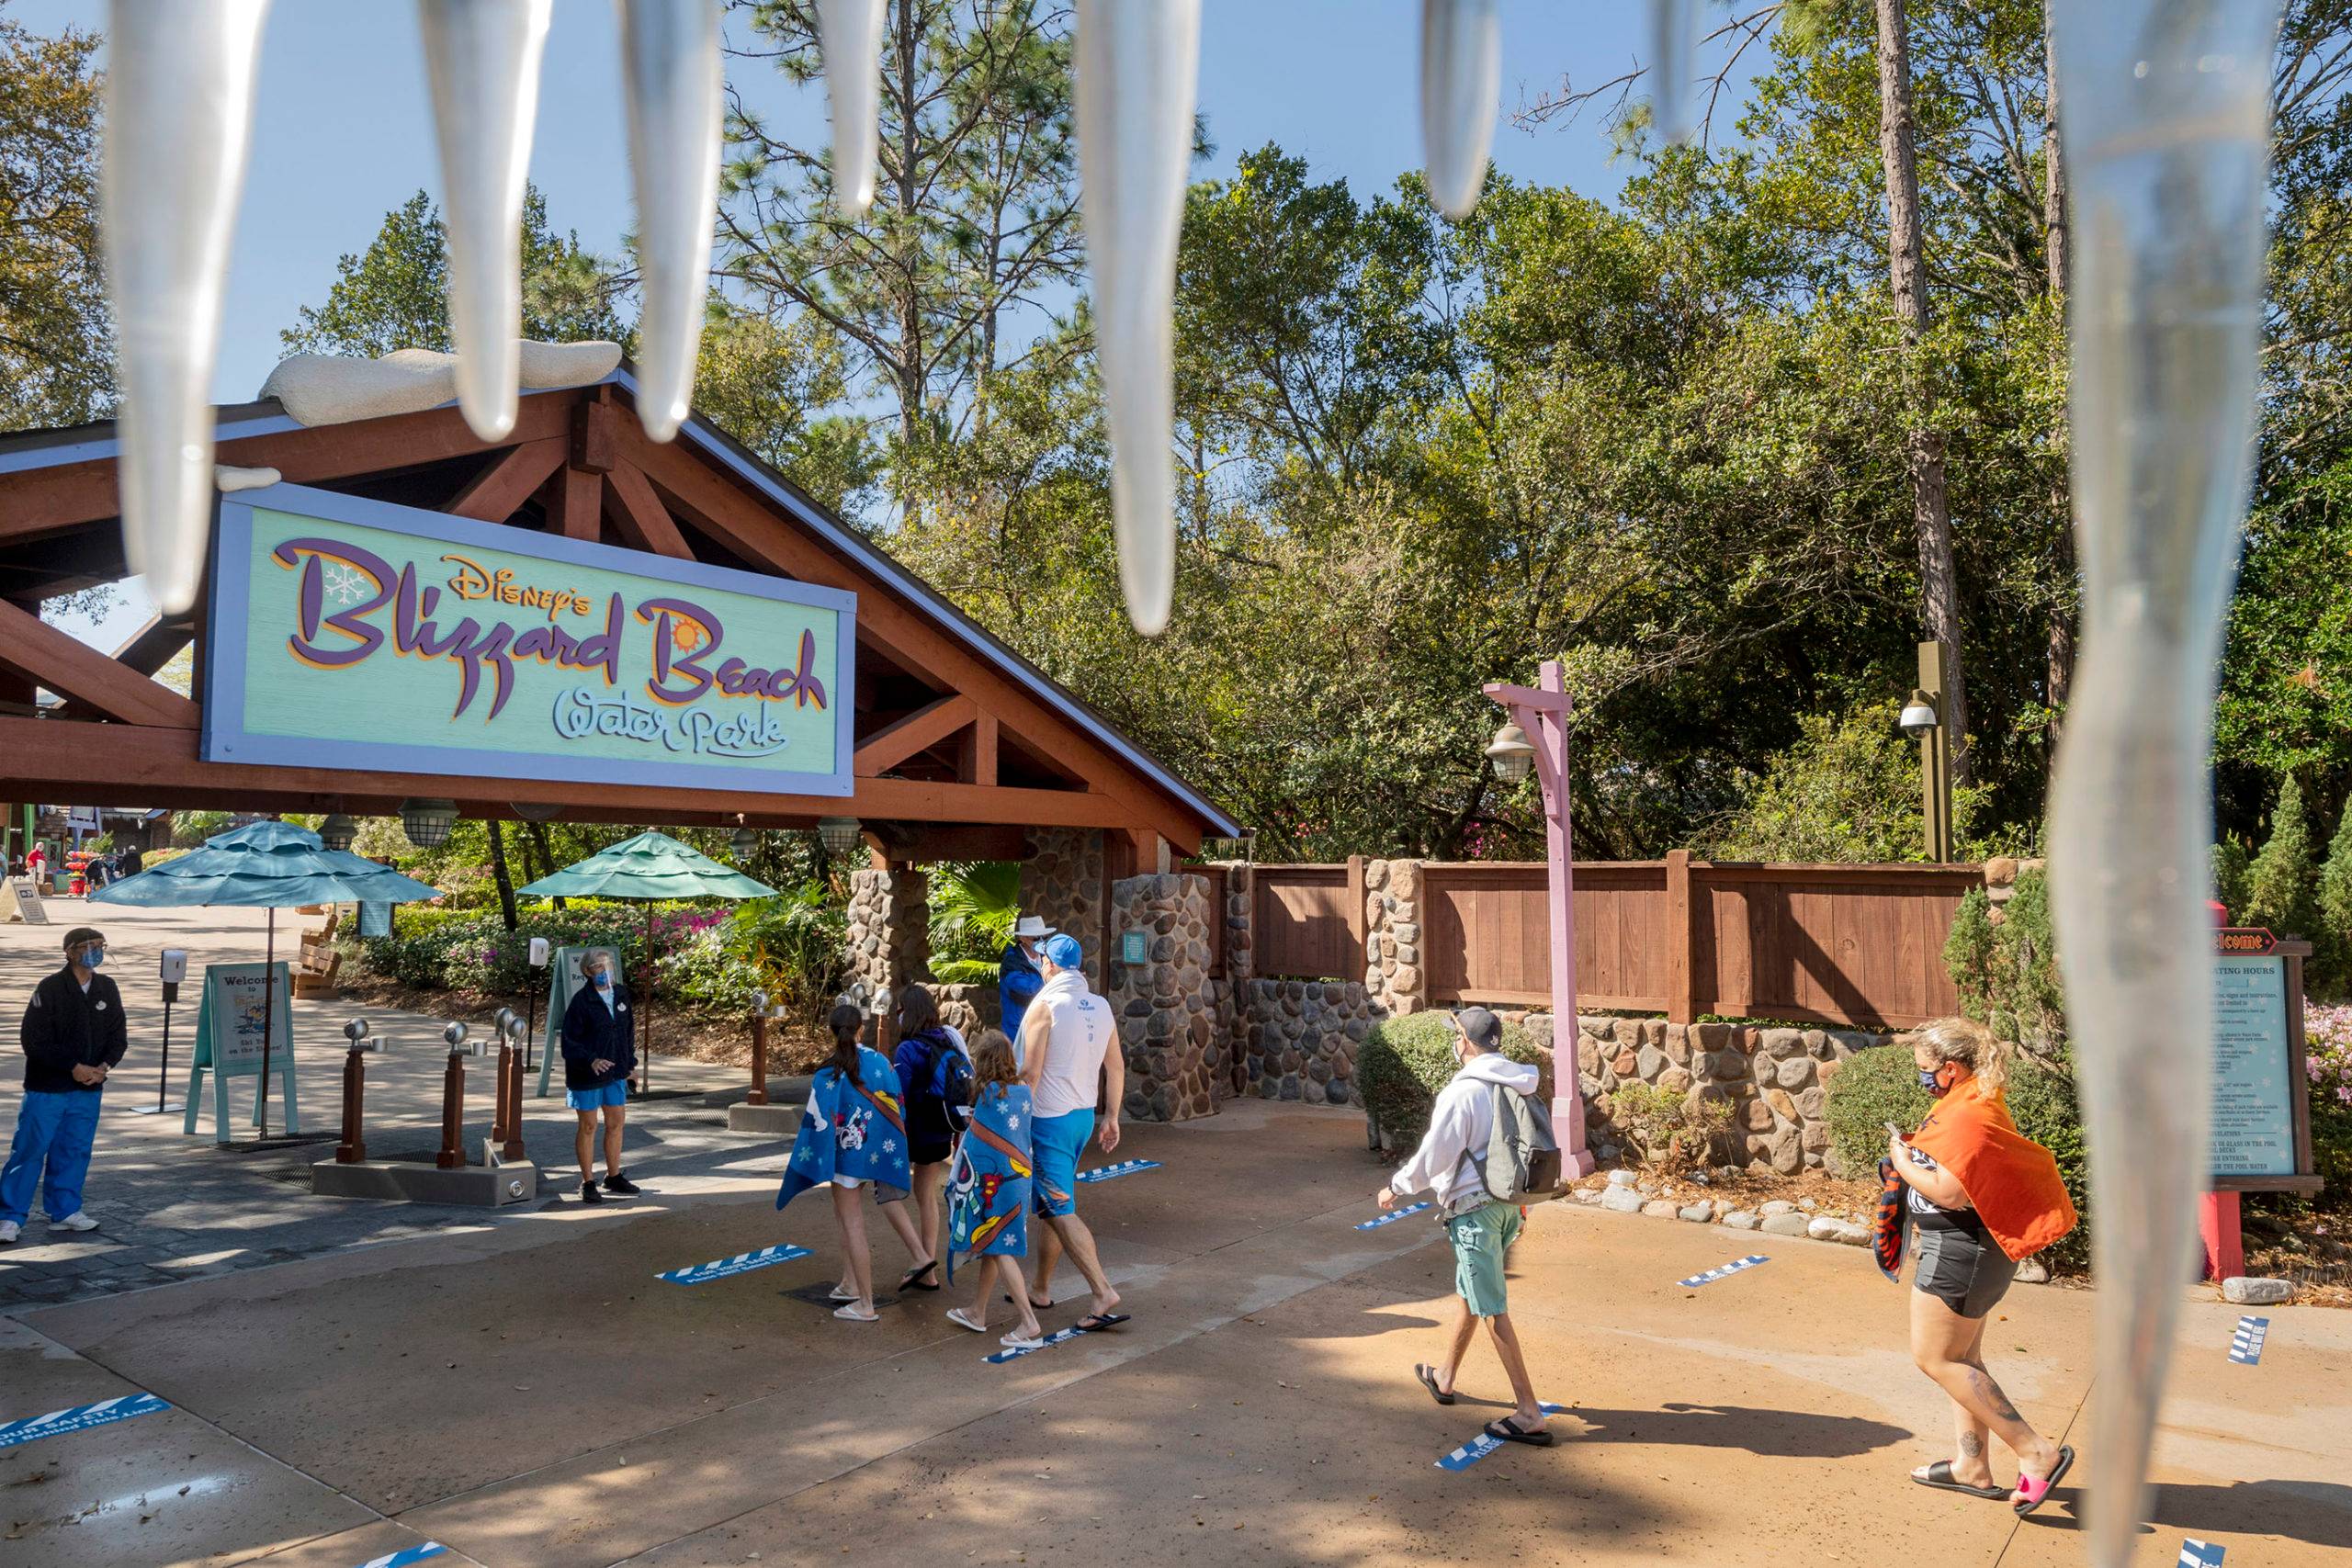 Blizzard Beach reopened in March 2021 after being closed due to the COVID-19 pandemic